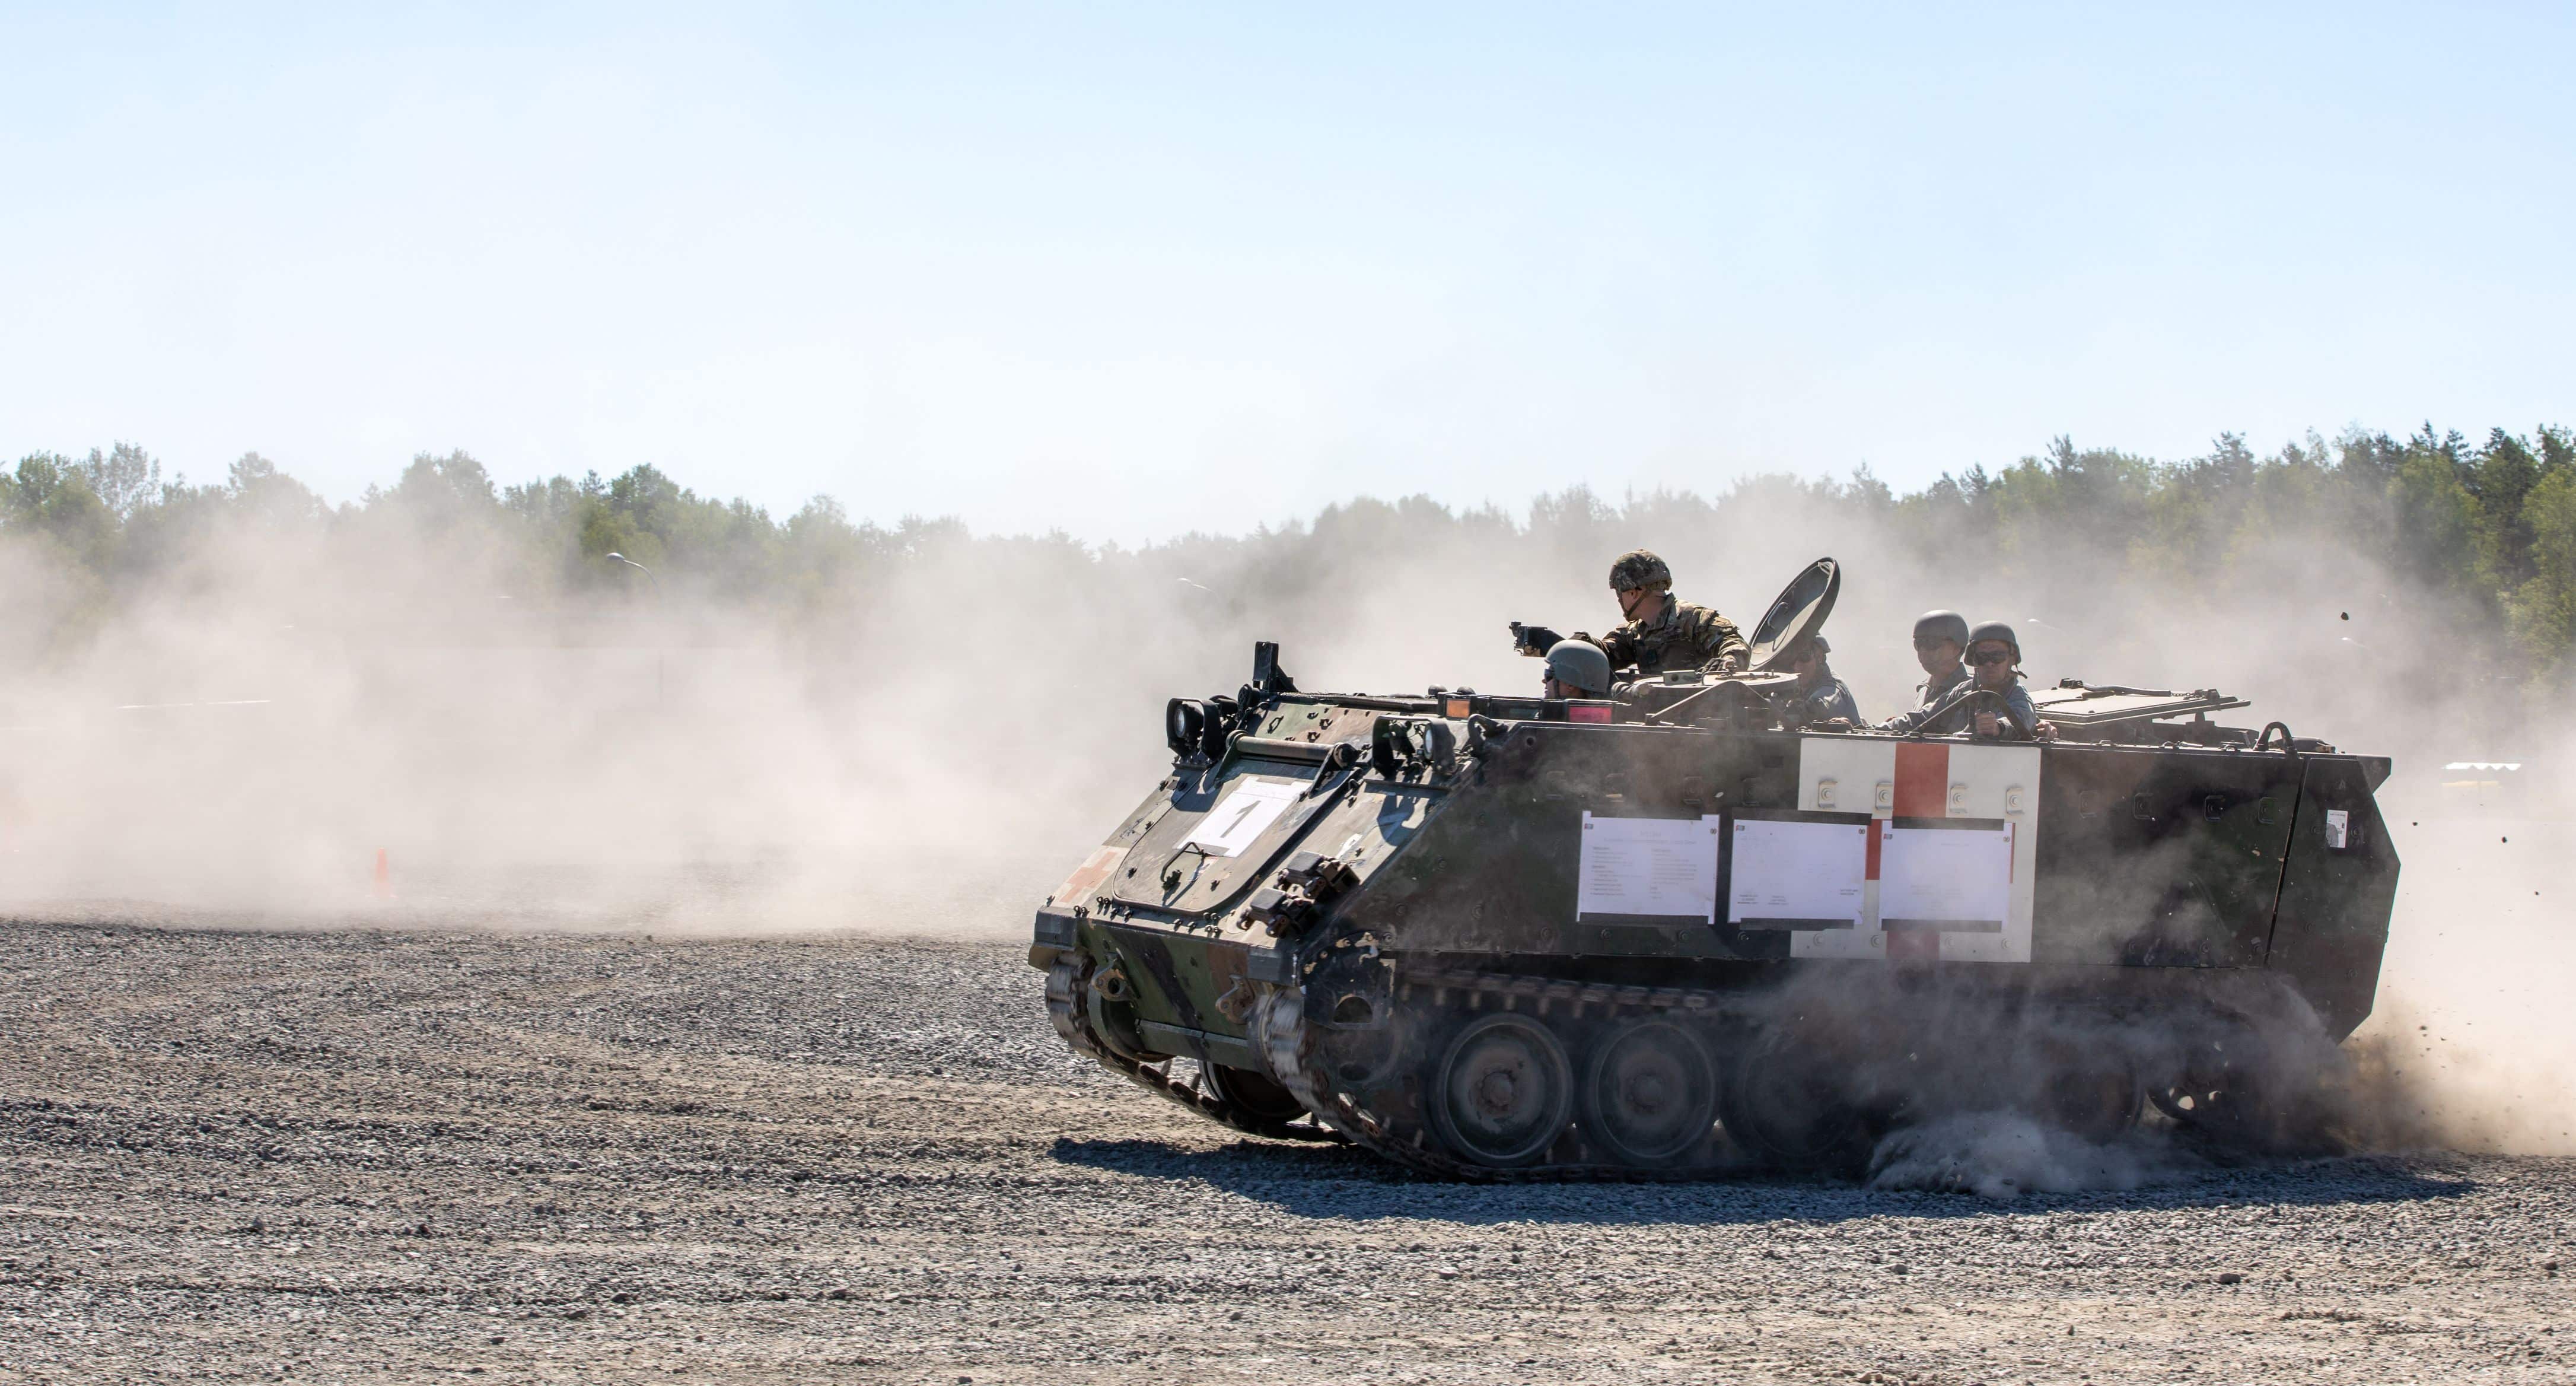 Soldiers with the Armed Forces of Ukraine operate an M113 Armored Personnel Carrier during the drivers training portion of the maintenance course at Grafenwoehr Training Area, Germany, June 2, 2022. Instruction for the course is provided by the U.S. as part of a security assistance package. (U.S. Army photo by Sgt. Spencer Rhodes, 53rd Infantry Brigade Combat Team)